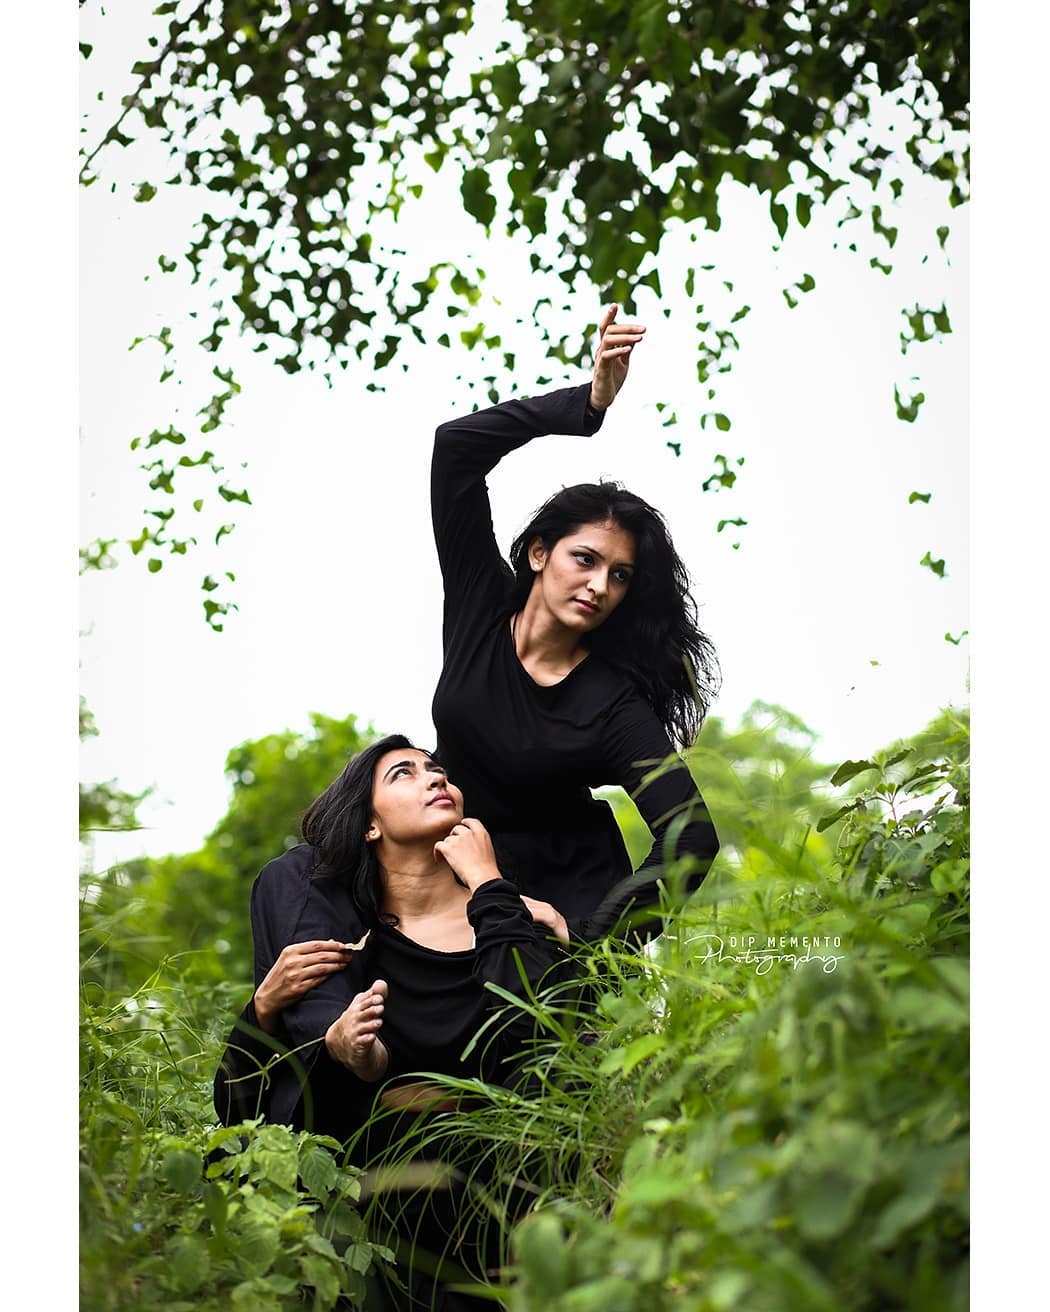 We should be lifting each other up and cheering each other on, not trying to outshine one another. .
.
The sky would be awfully dark with just one star..
.
.

InFrame : 🍂Komal & 🍃Riddhi
.
.
Dance with Nature Concept Shoot.

Shoot By: @dip_memento_photography, ---------------*--------------*----------------*---------------*---------
#streetshoot #naturephotography #streetconceptshoot #conceptshoot #conceptphotoshoot #ahmedabad #dipmementophotography #dancephotography
#dslrofficial  #dance #photooftheday #portraitsofficial #50mm  #picoftheday  #girl #indiafeature #keeptagging #9924227745 #_ip #_ig  #bestoftheday #danceshoot #naturelovers
#indiaportraits #indiaportraits #sun #keepdancing